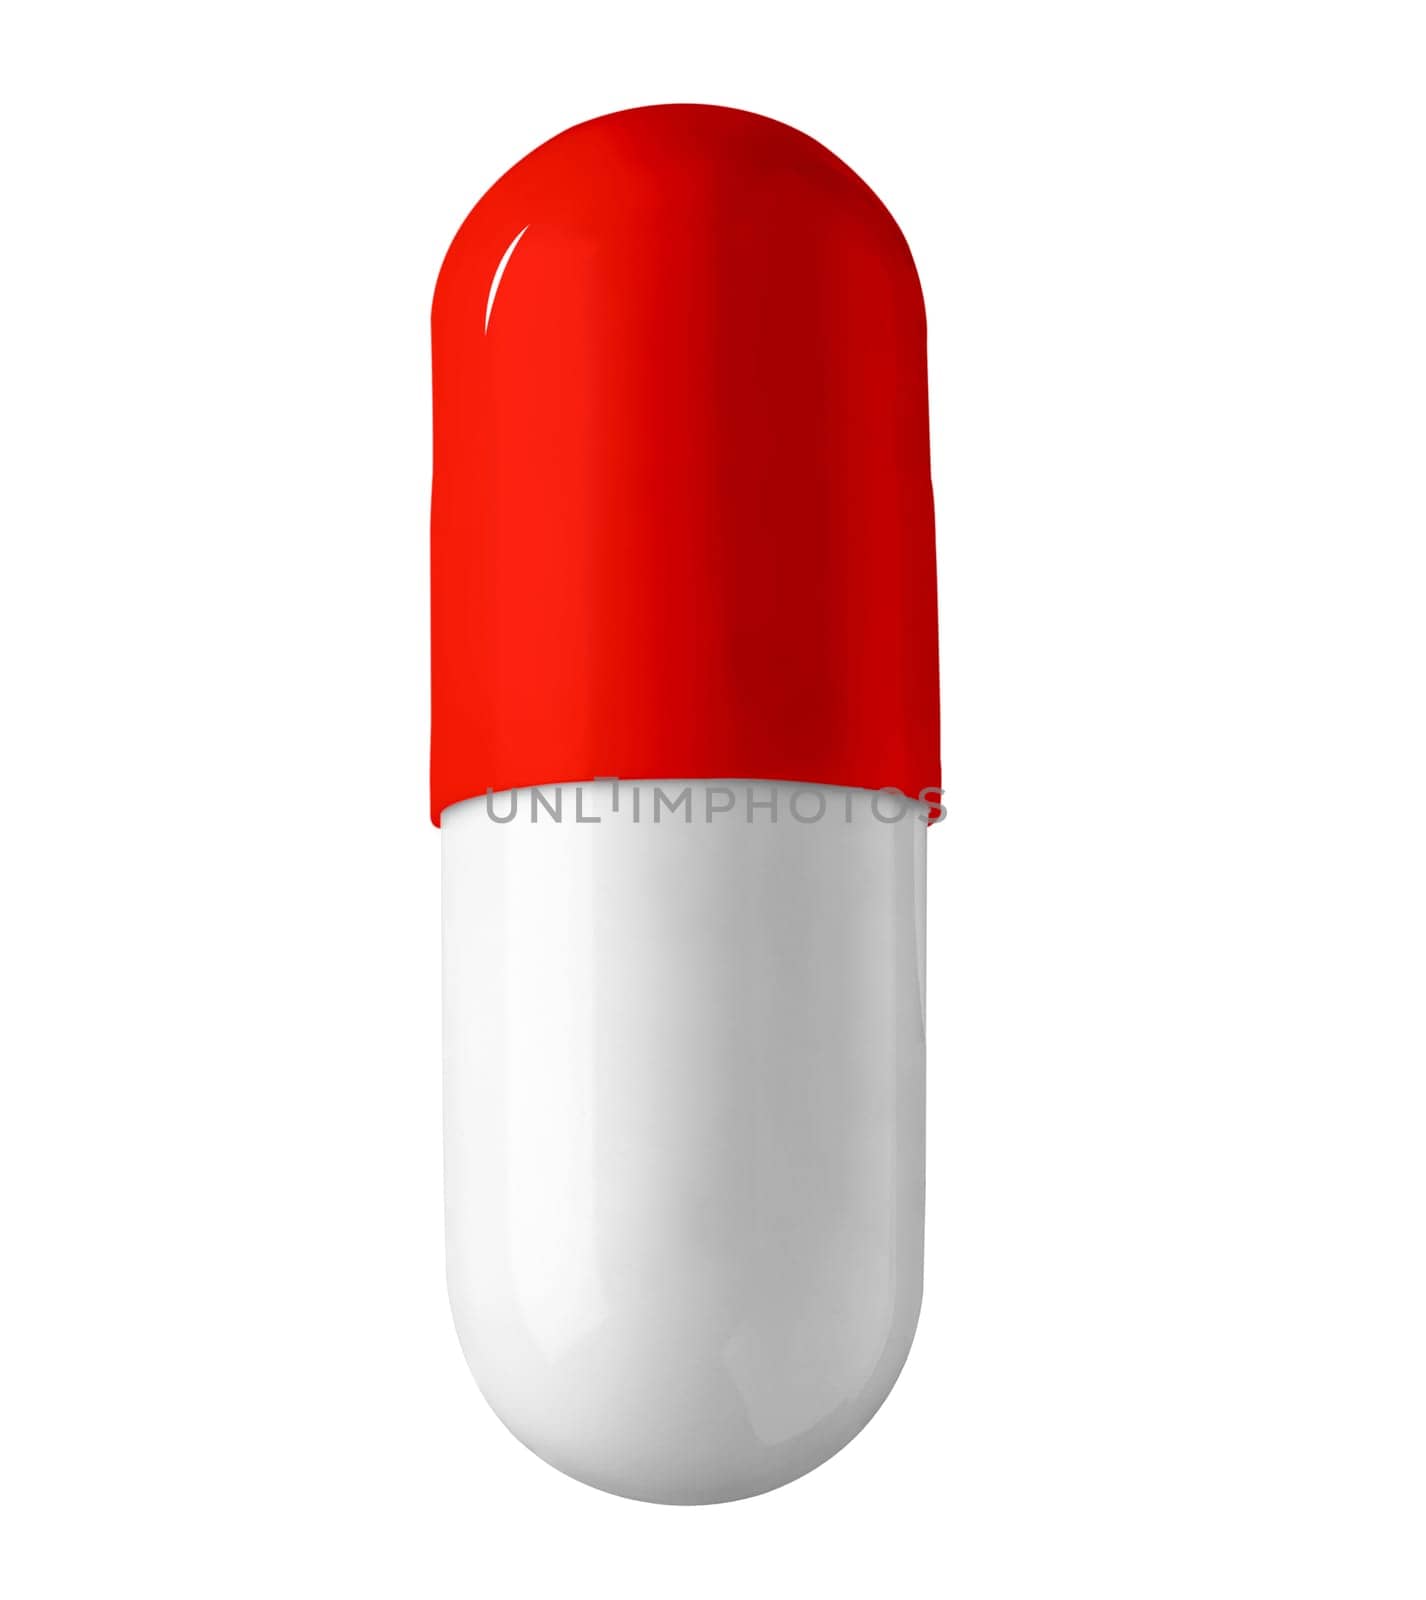 white red pill medical drug medication by Picsfive